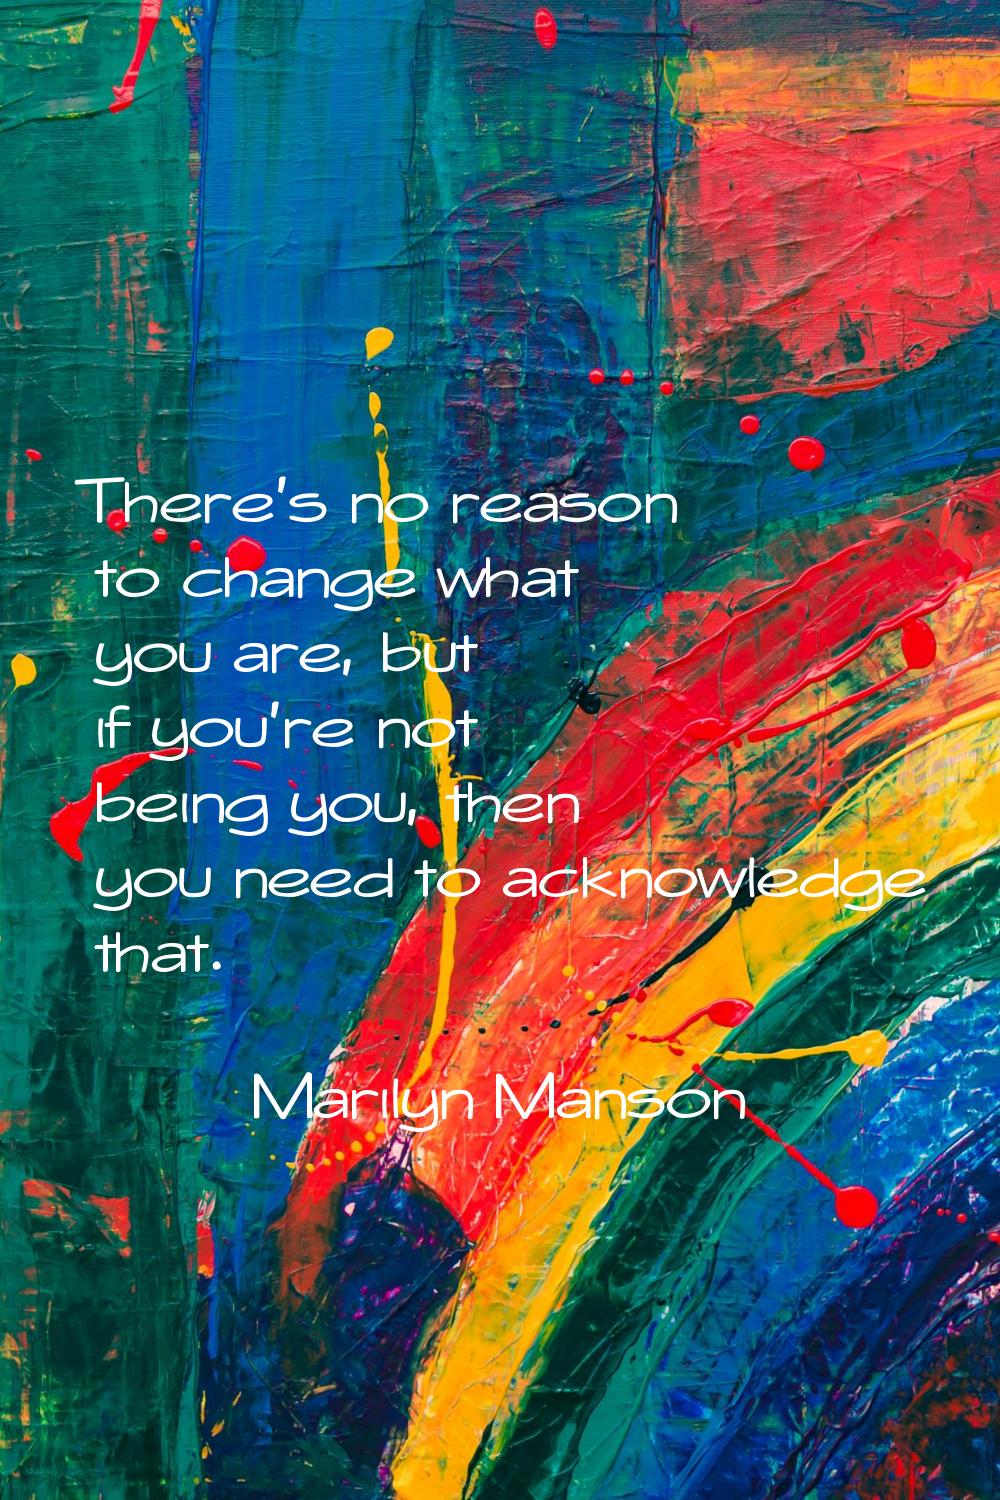 There's no reason to change what you are, but if you're not being you, then you need to acknowledge